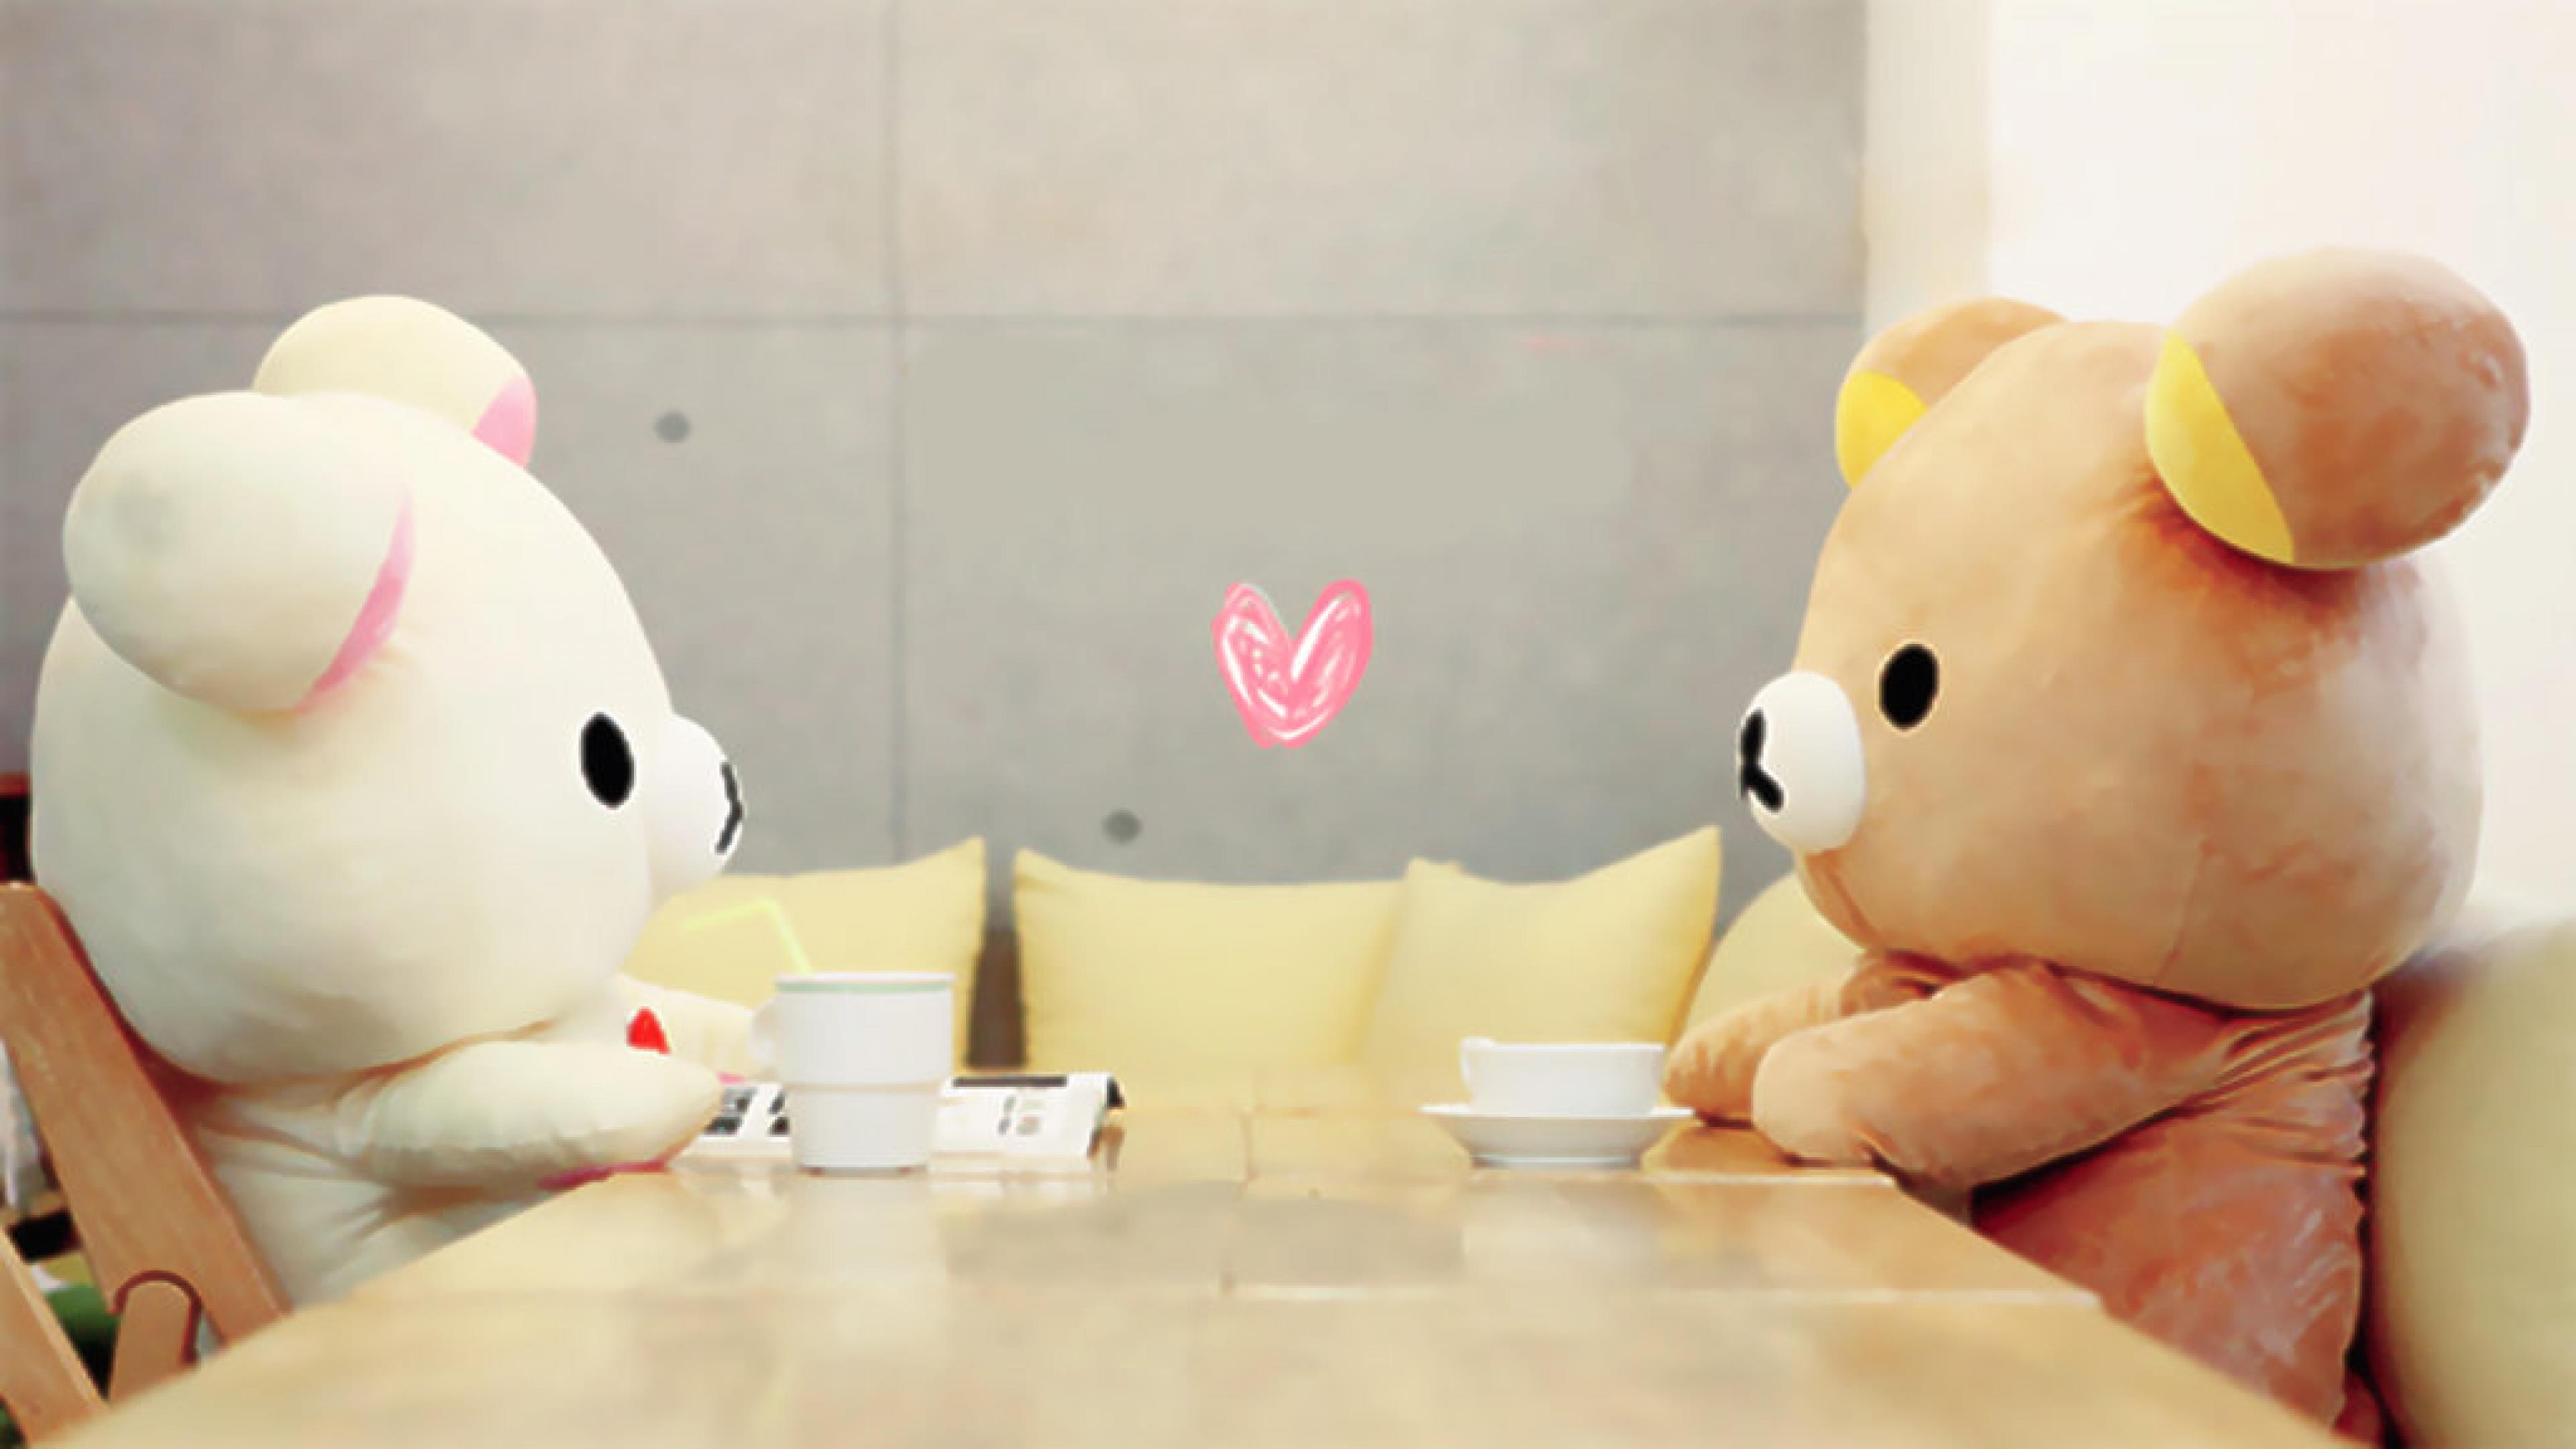 Couple Cute Images Free Download - Live 4K Wallpapers